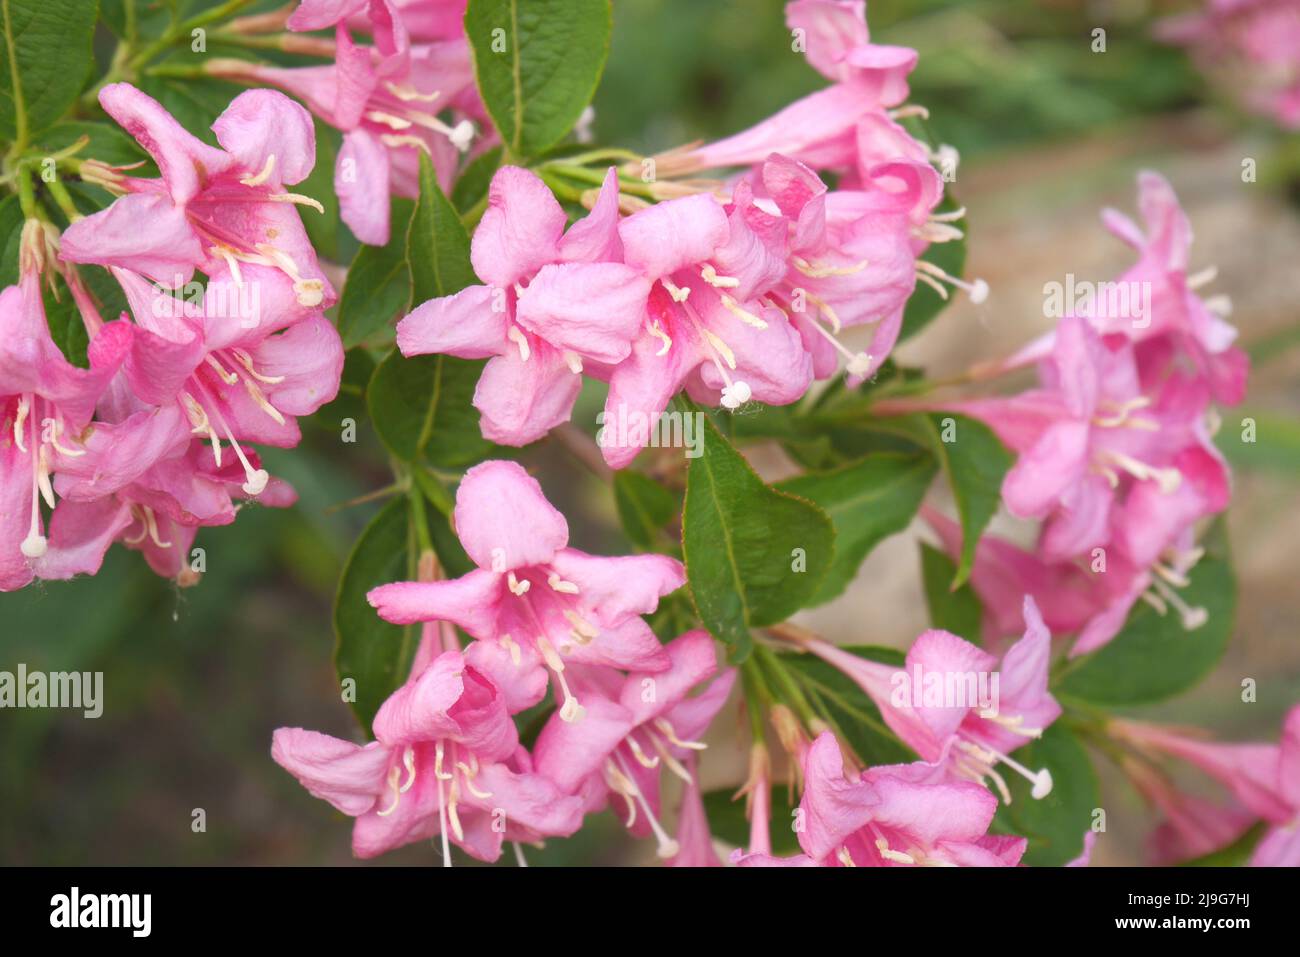 Pink weigela flowers on a shrub in a garden, Szigethalom, Hungary Stock Photo